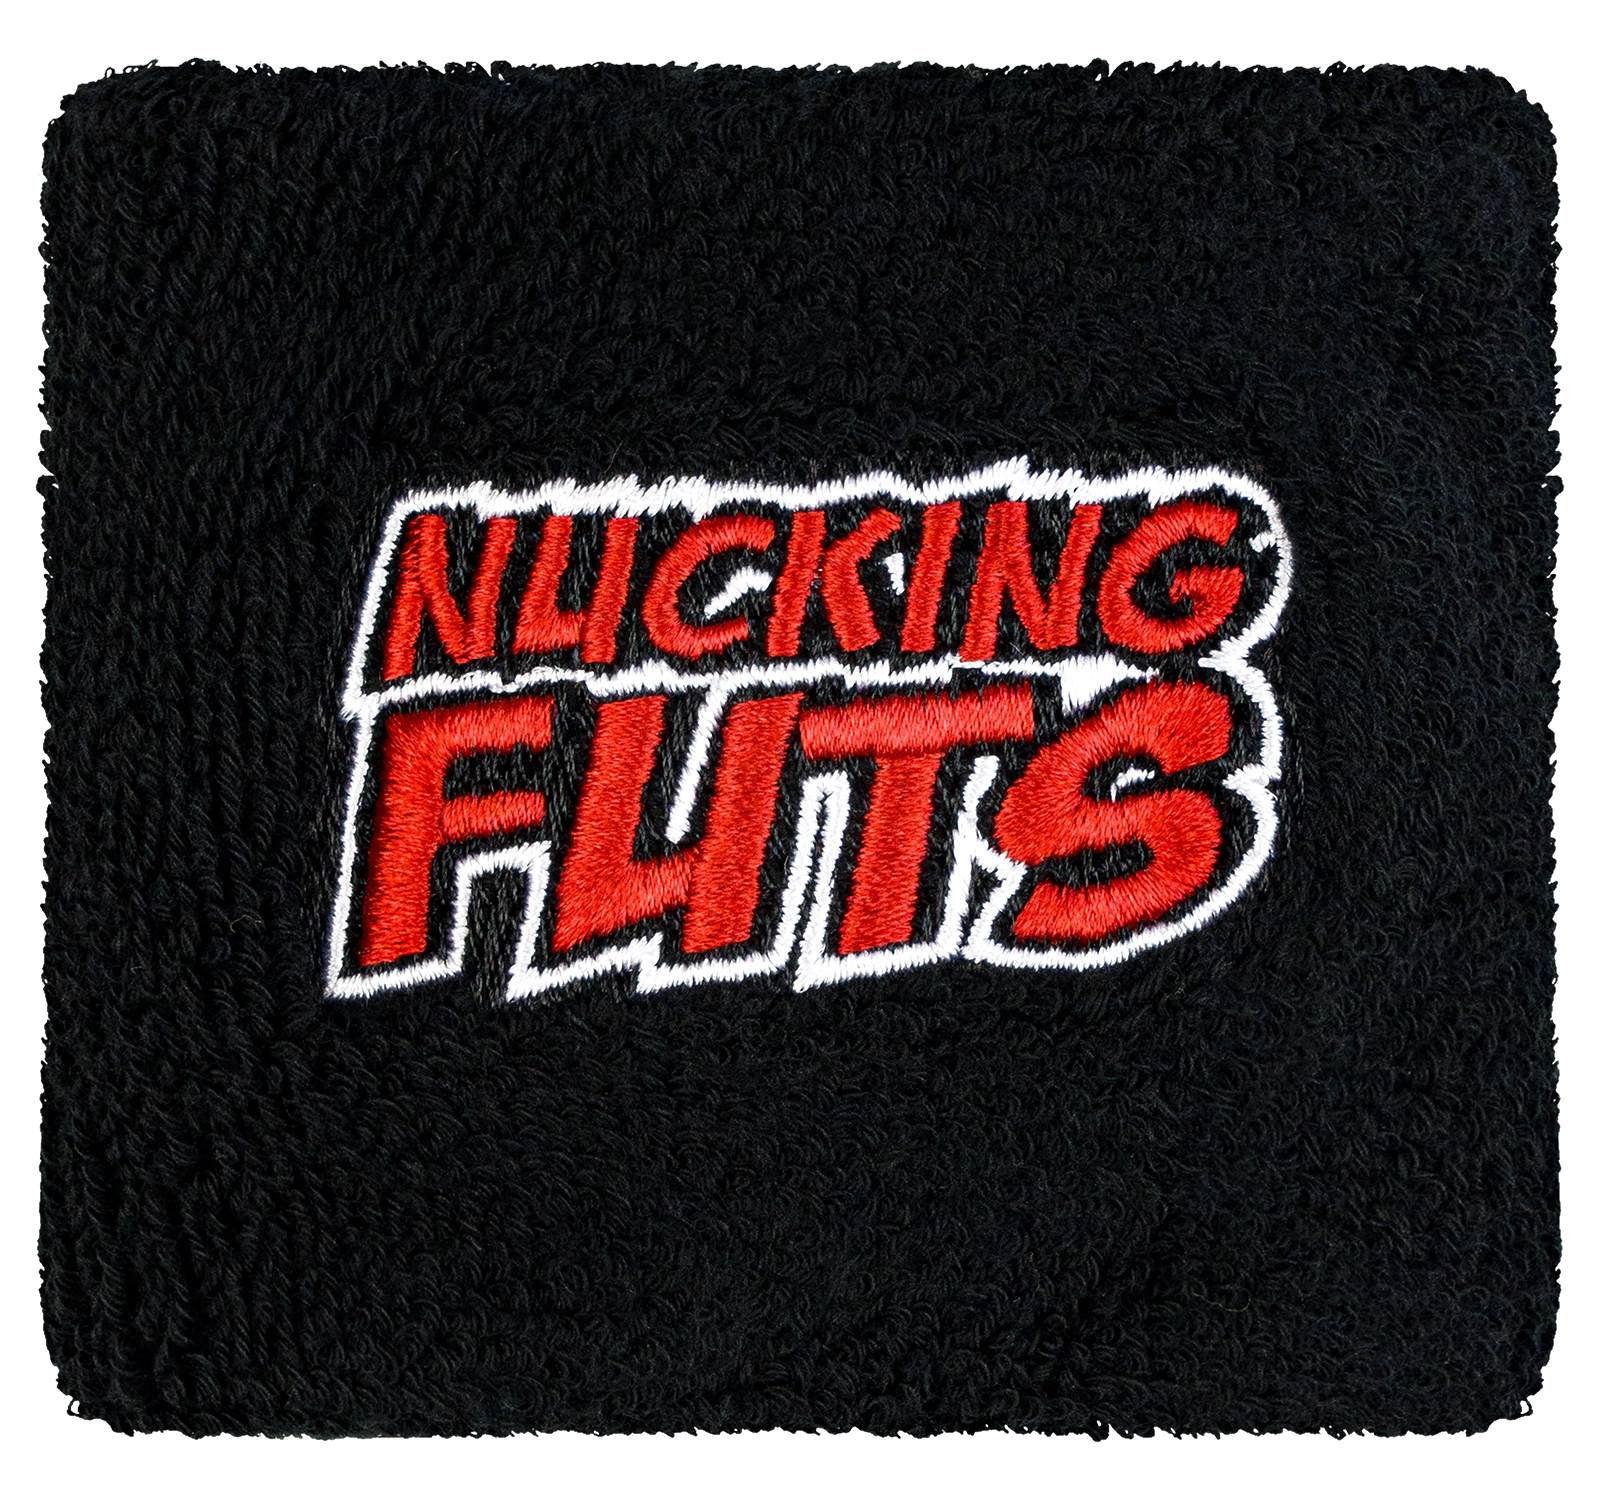 Nucking Futs - Reservoir Cover